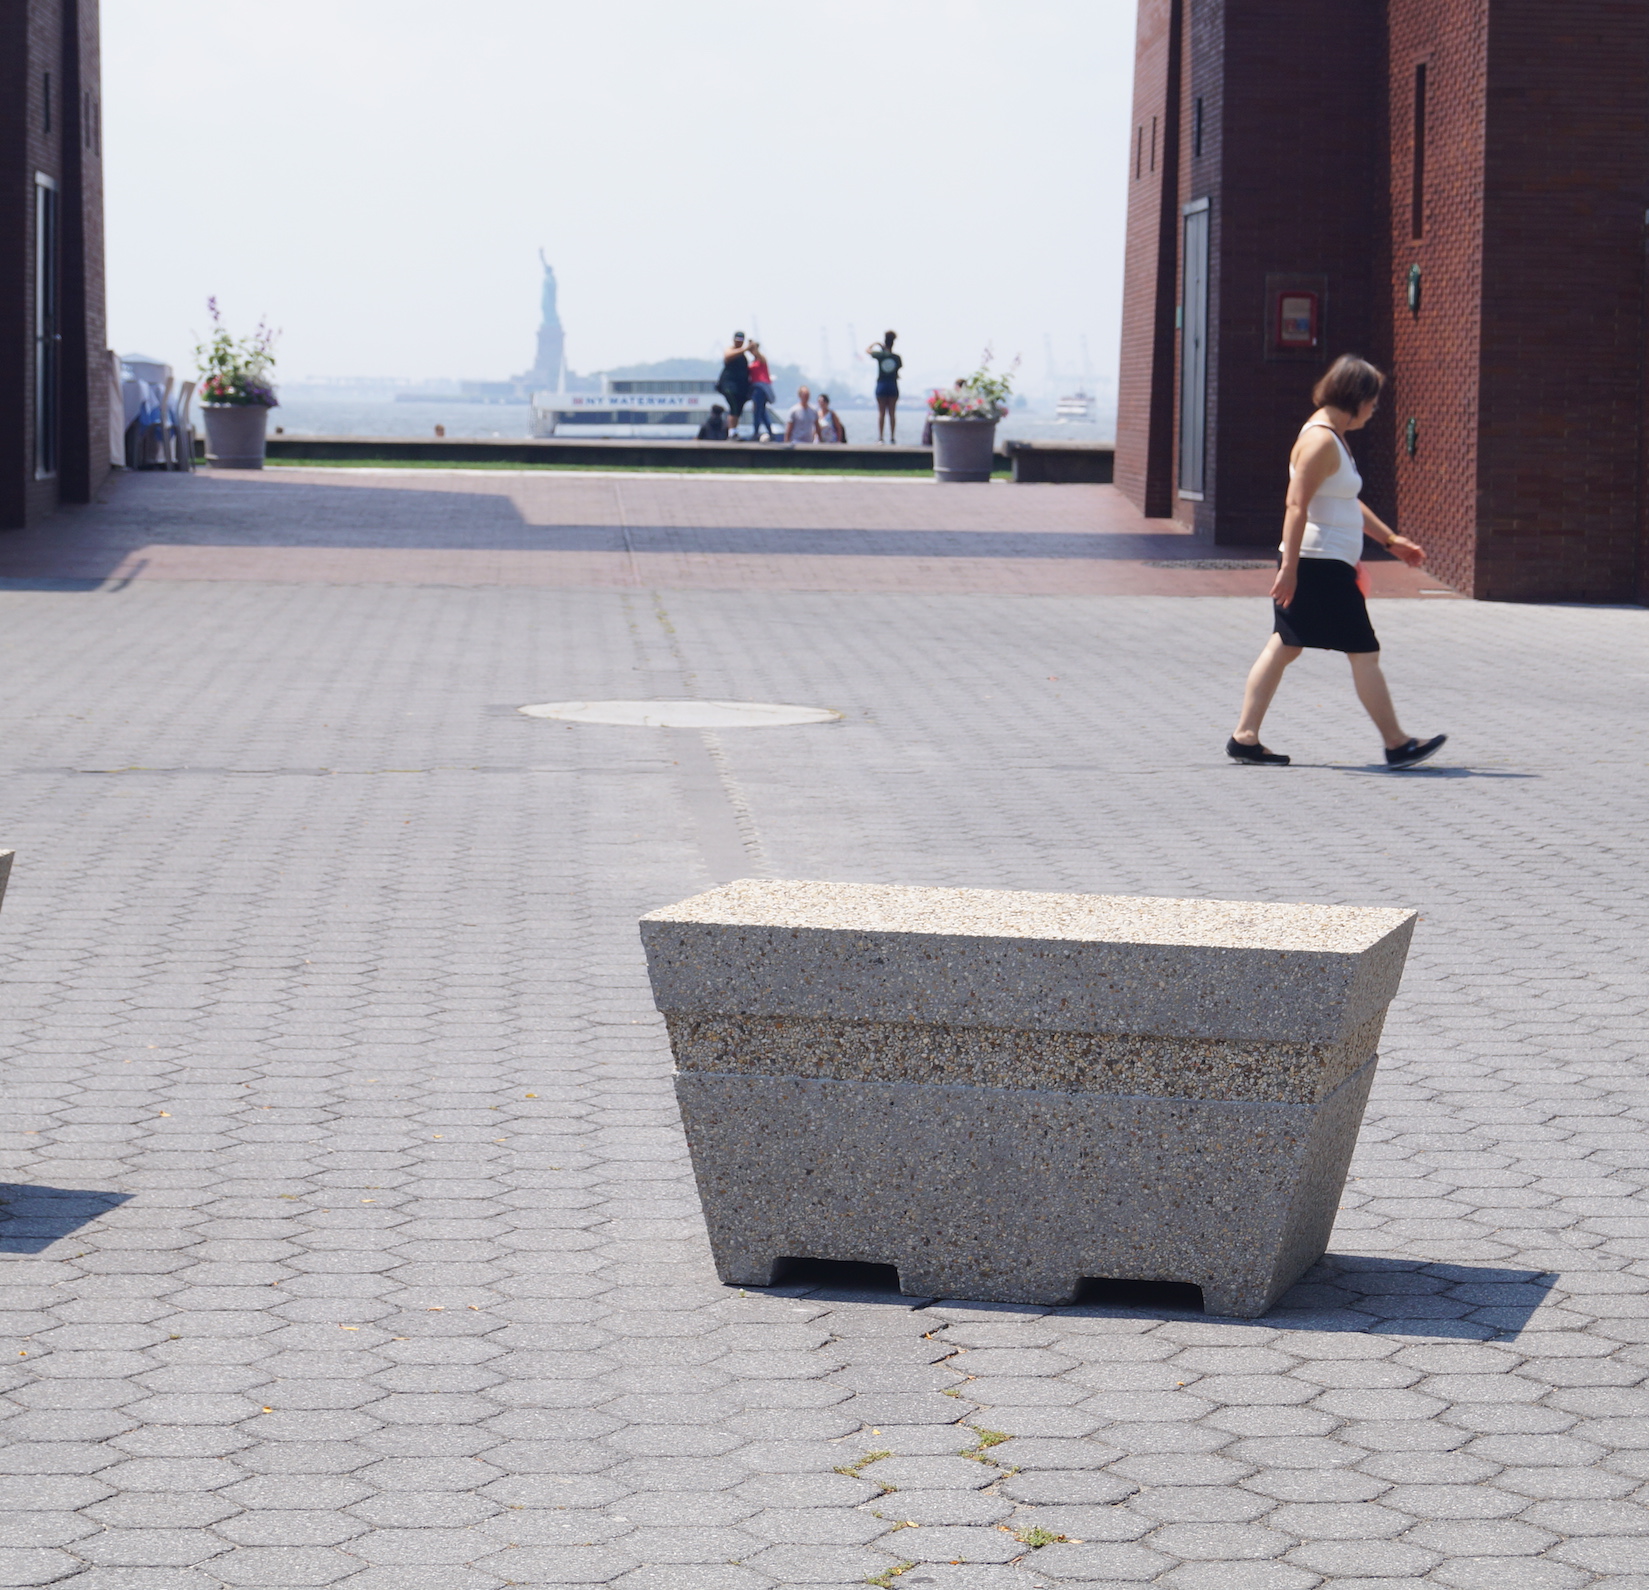 Product Image - Security Bollards